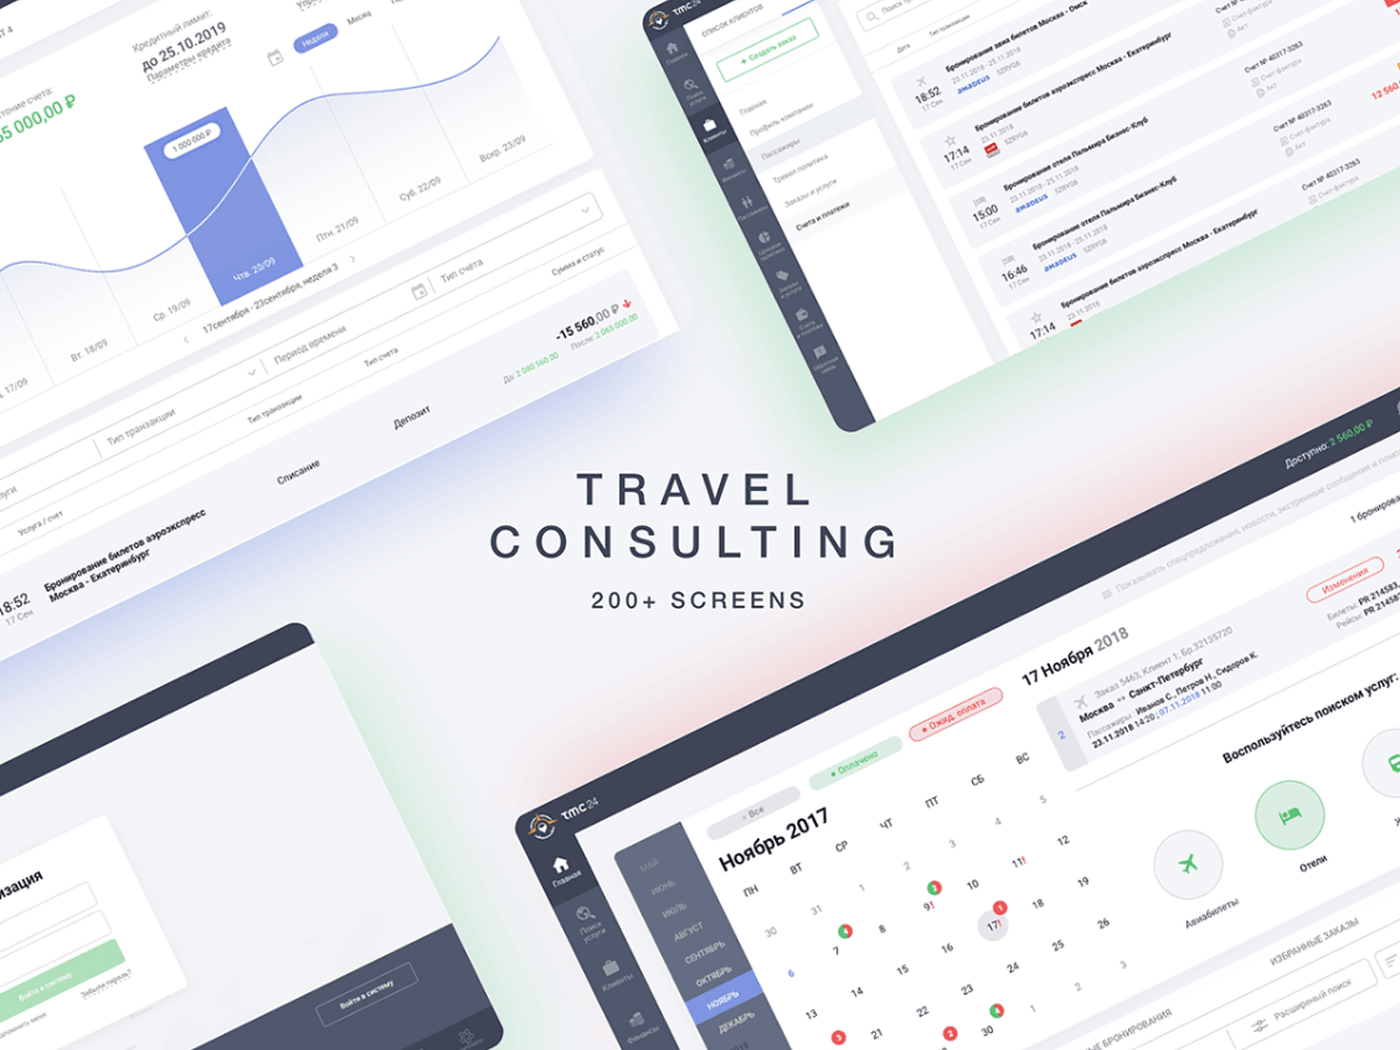 #consulting #dashboard #Travel #UI #web  